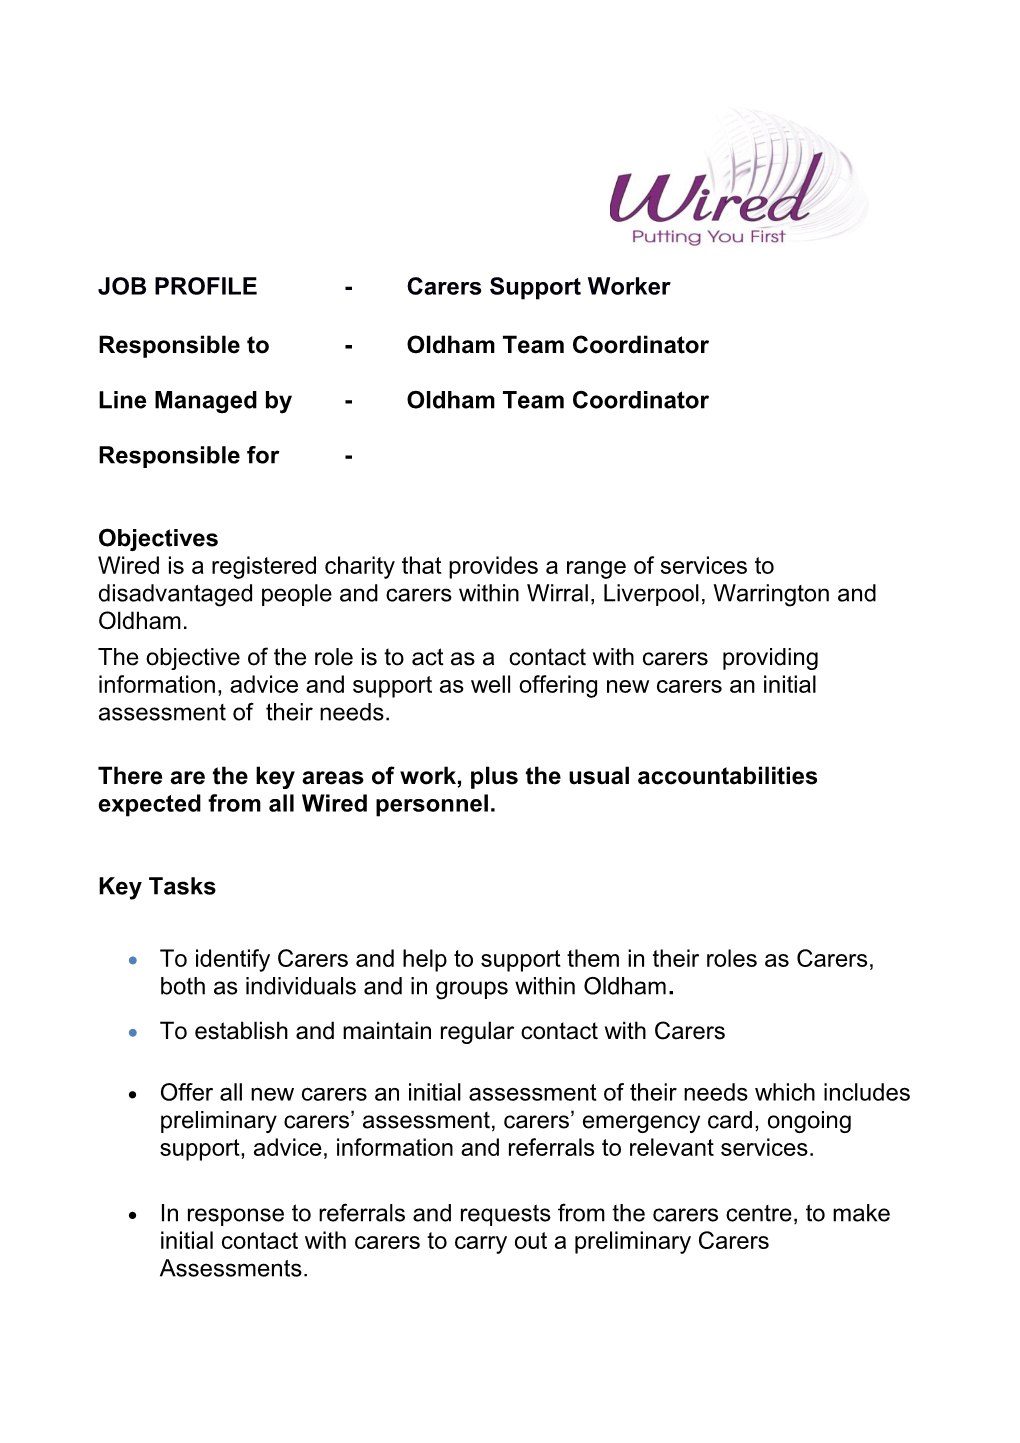 Job Profile- Carers Support Worker